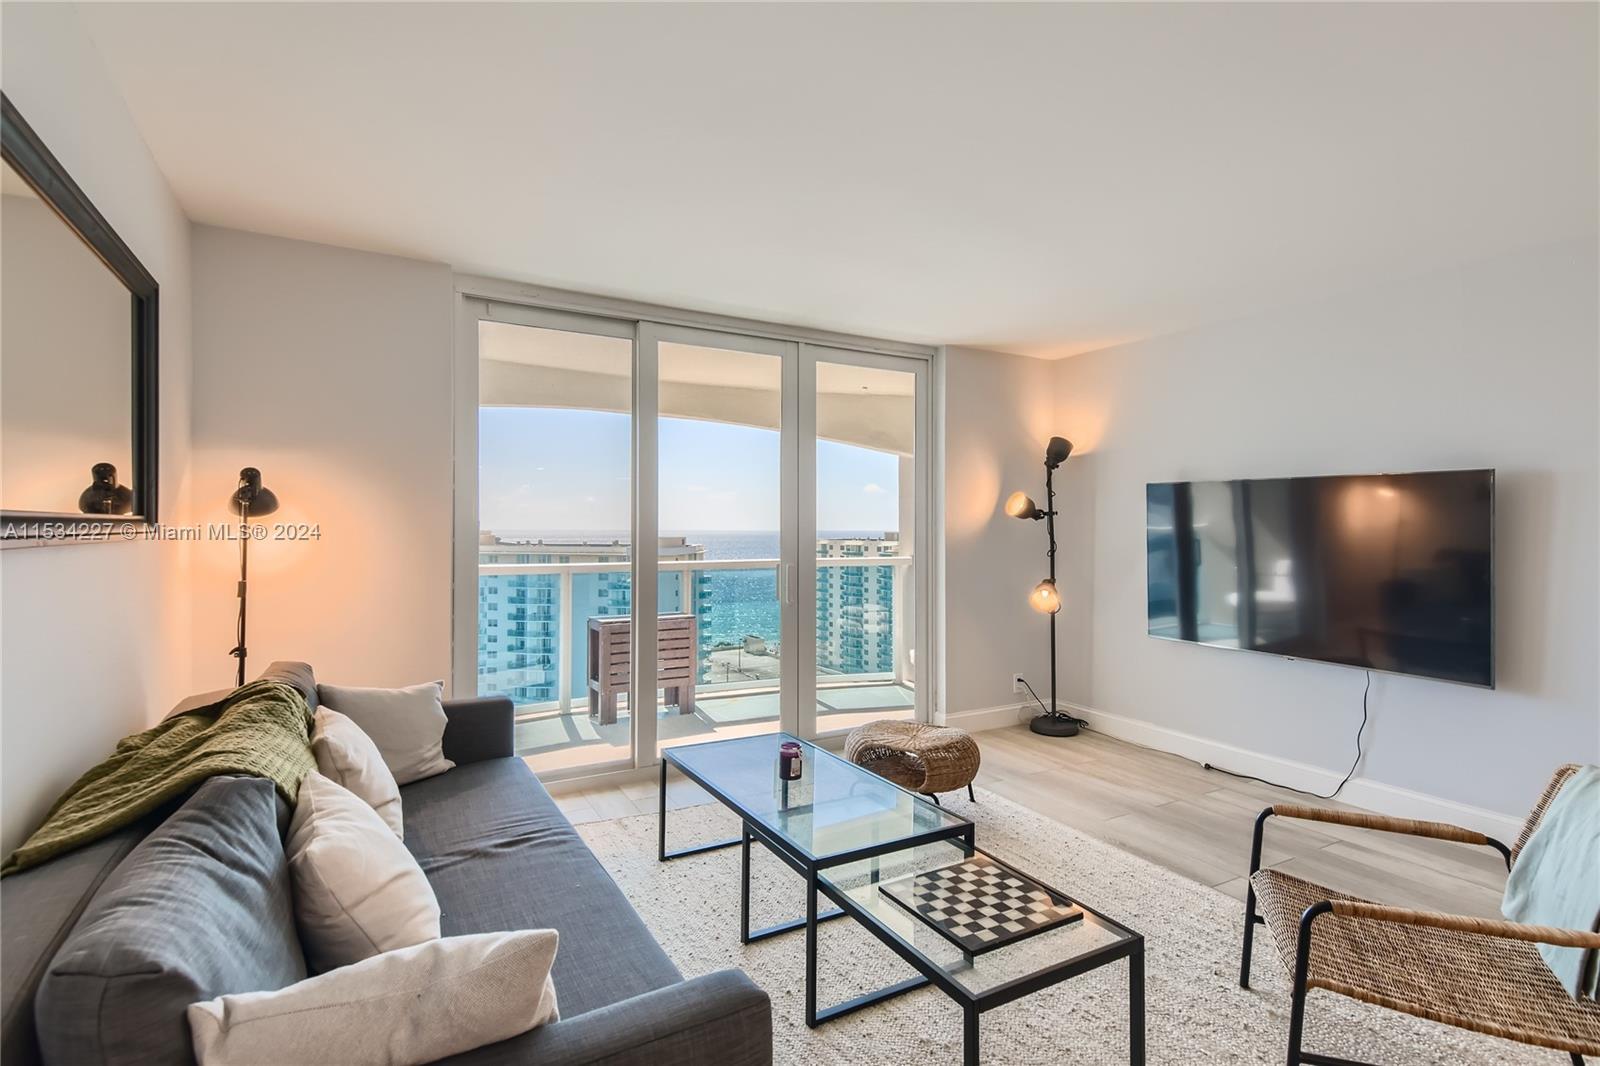 Photo of 3800 S Ocean Dr #1818 (Available May 25) in Hollywood, FL